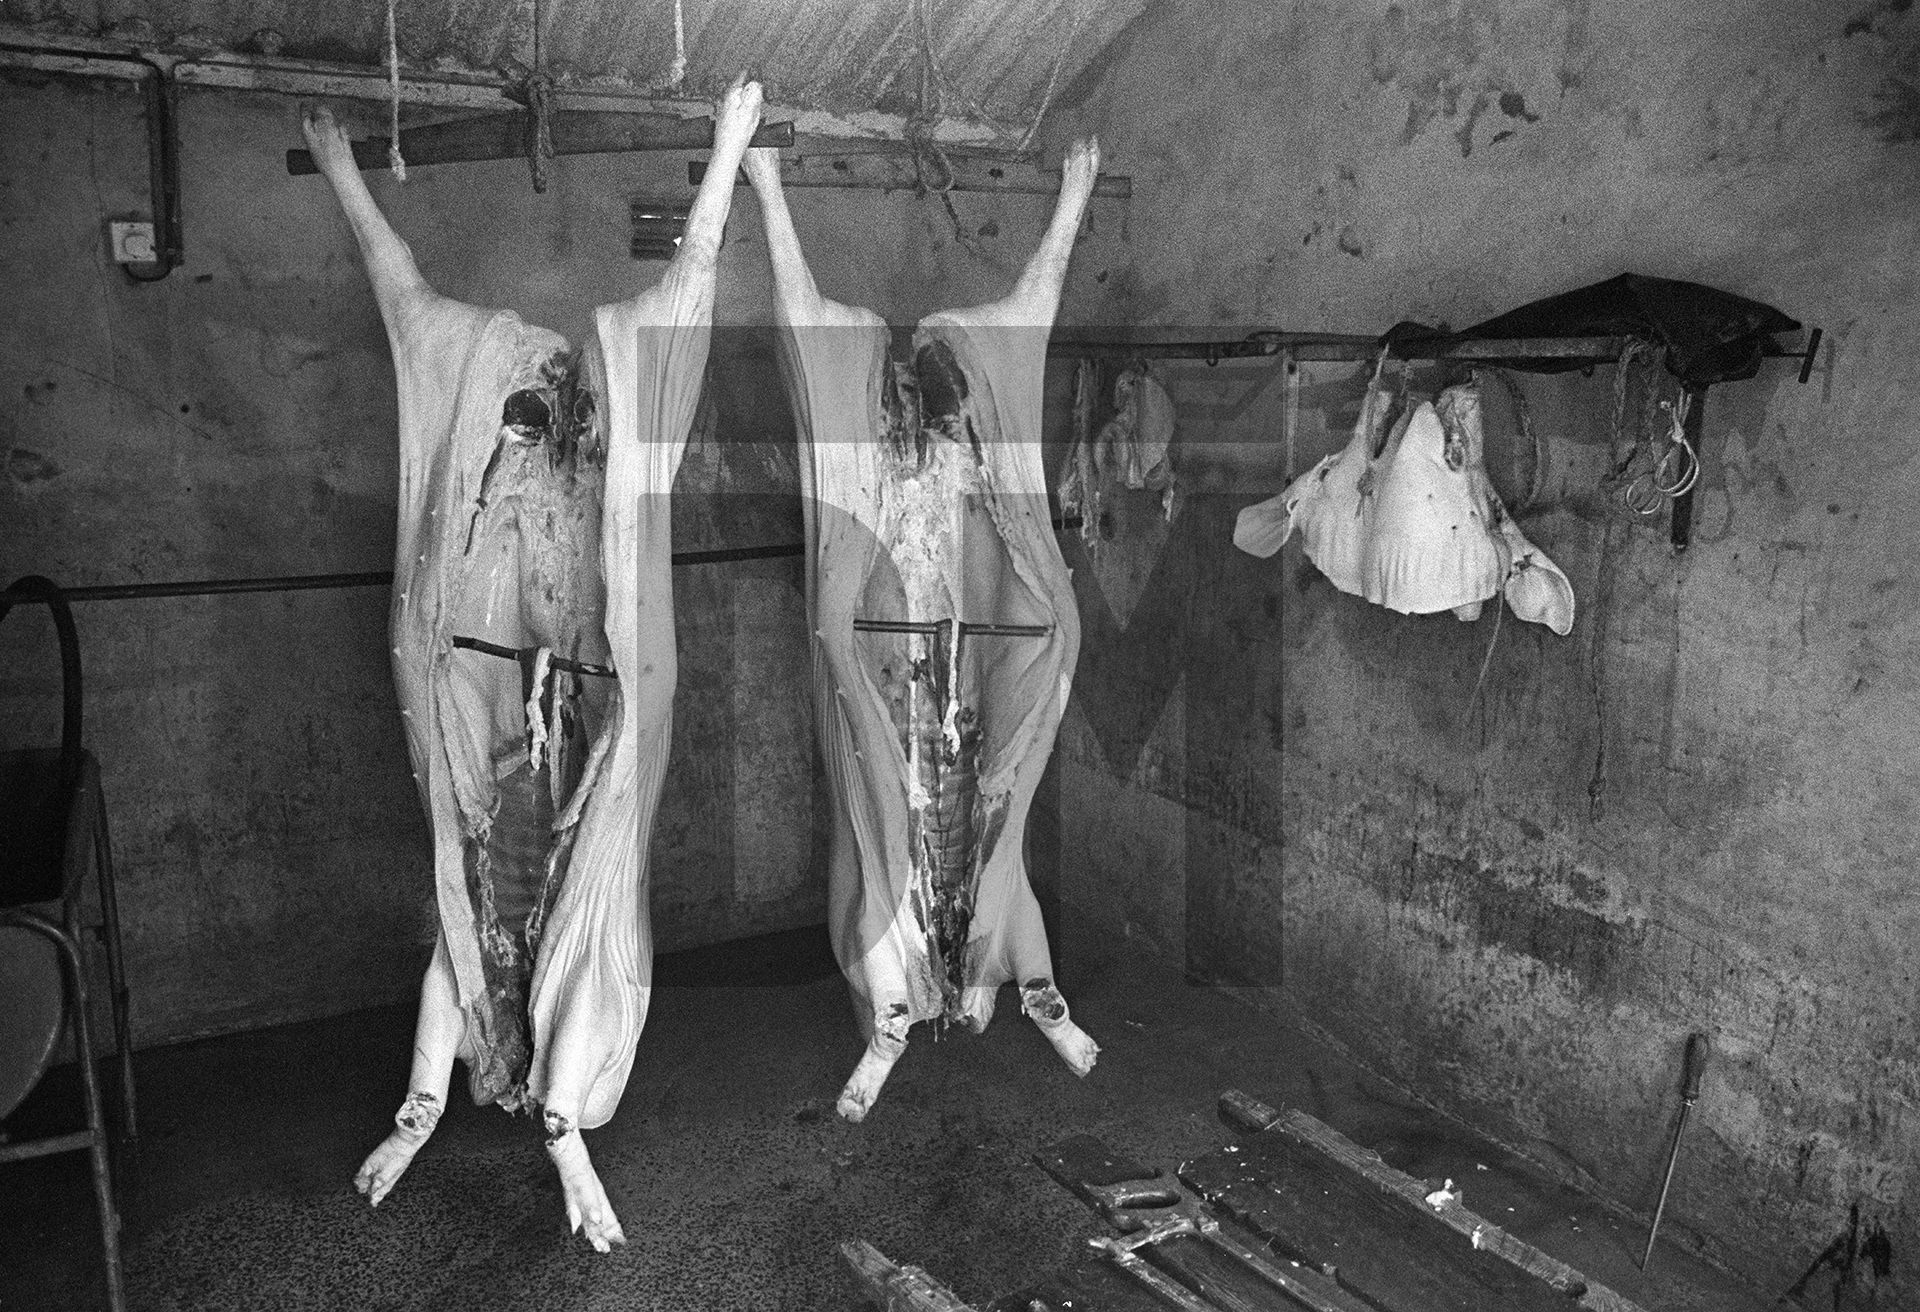 Freshly slaughtered bacon pig carcasses hanging in the outhouse. North Yorkshire 1976 by Daniel Meadows